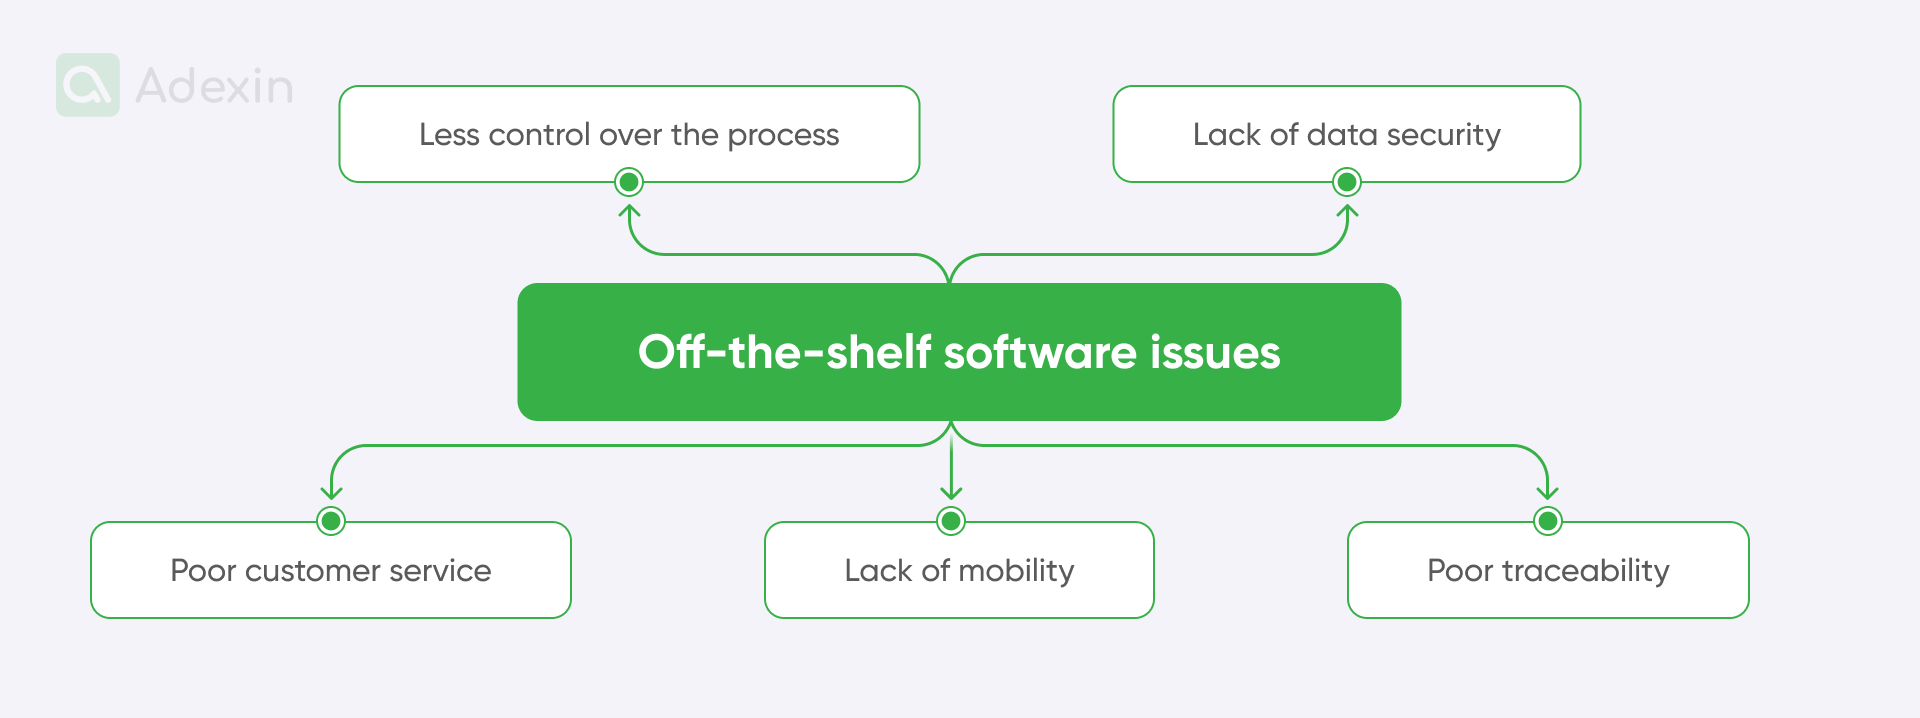 Off-the-shelf software issues